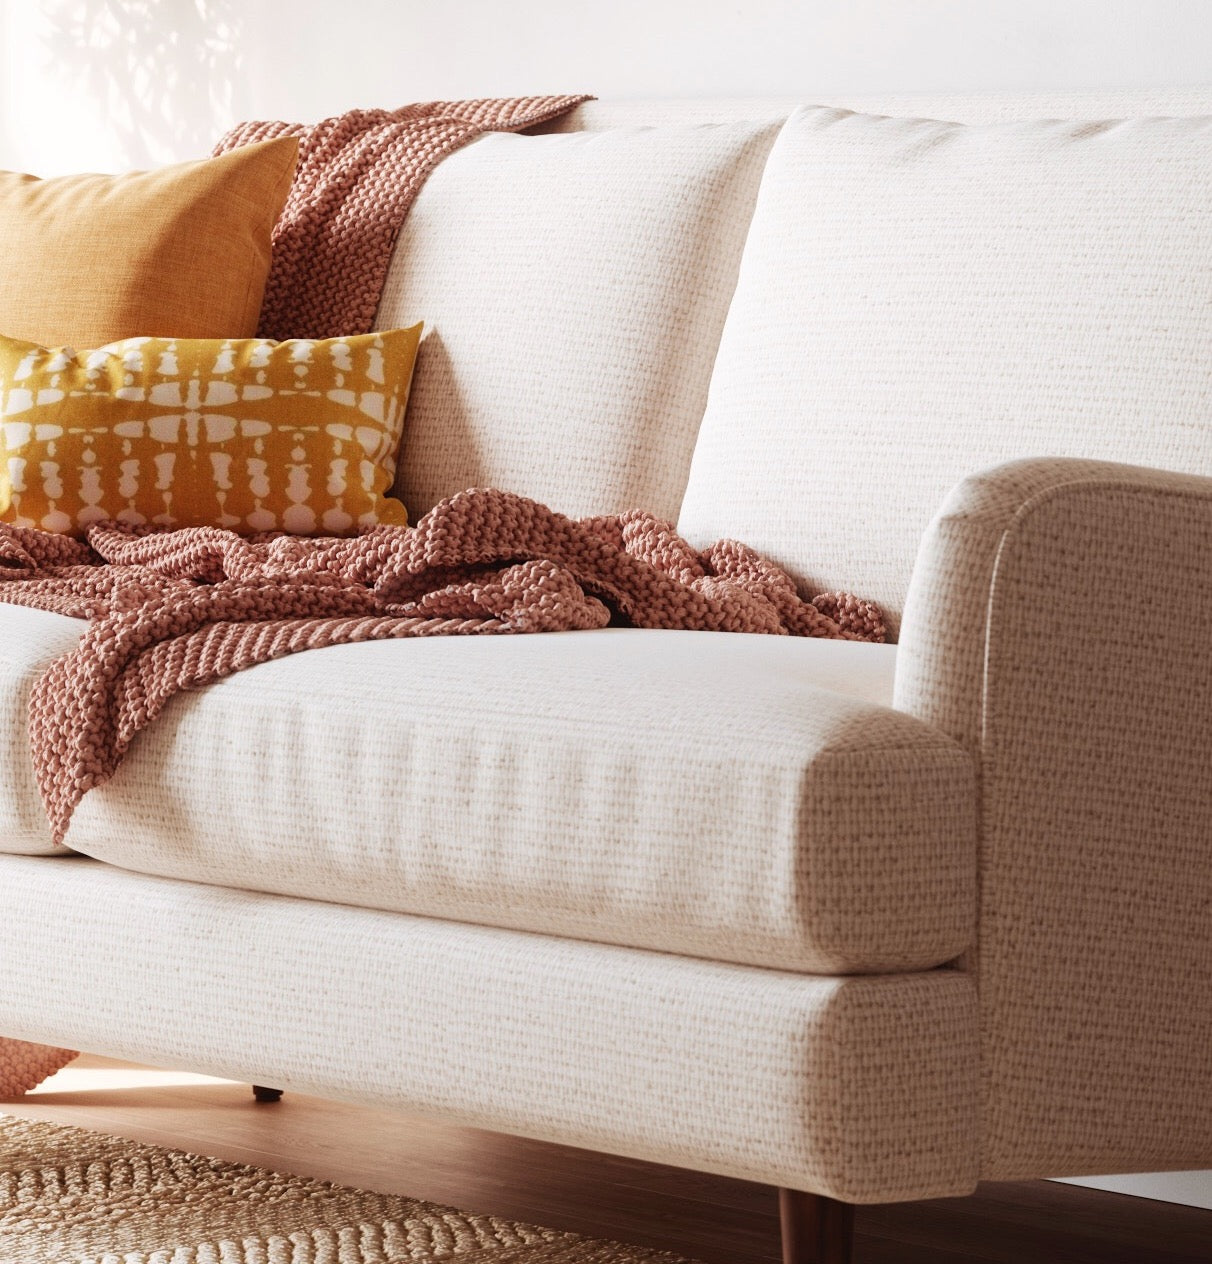 How to Pick the Right Sofa